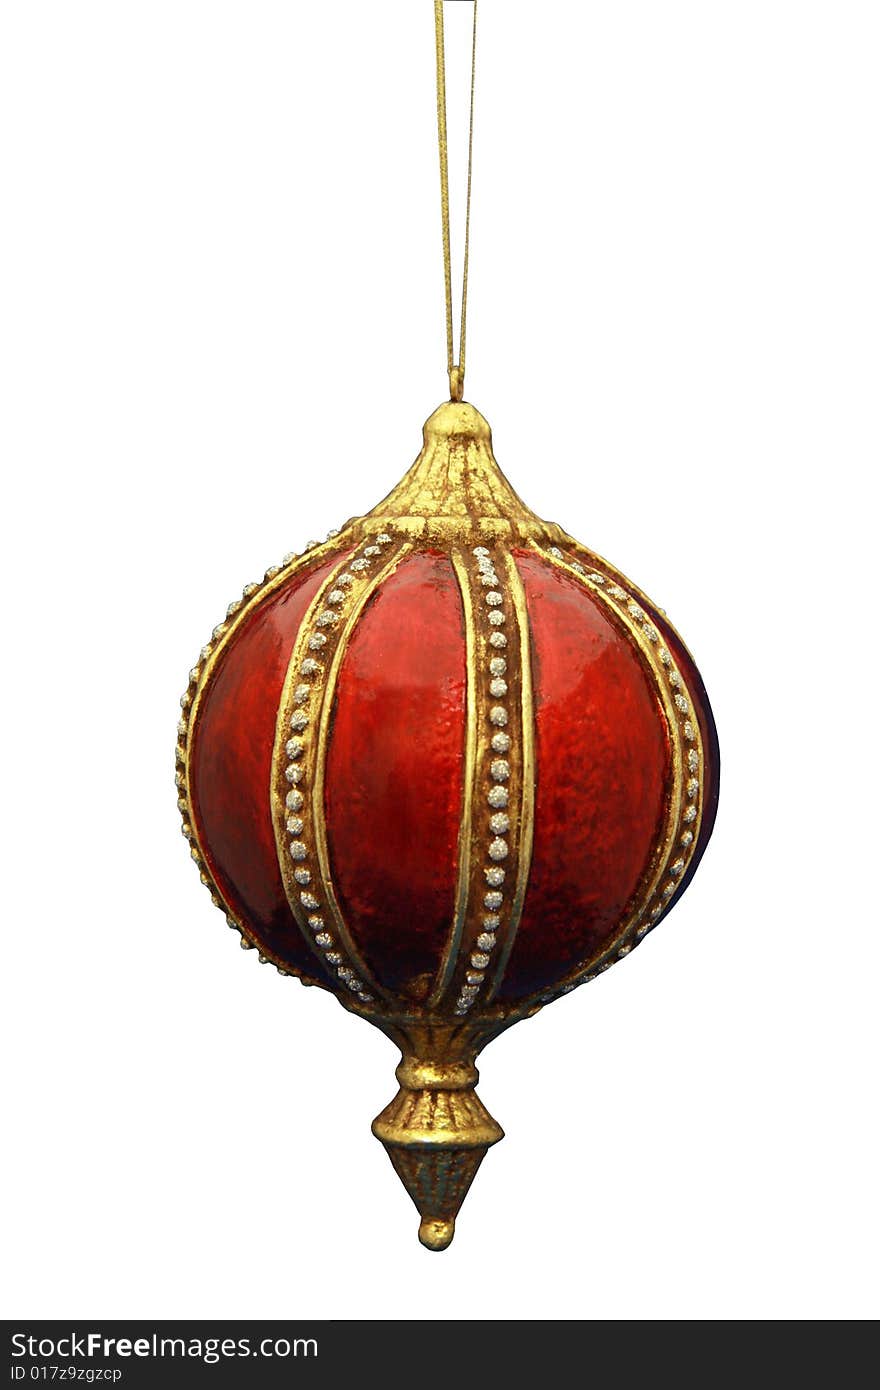 Attractive Shiny Red Ornate Christmas Tree Ornament with gold and studded trim and tips. Gives off the feel of Royalty Kings and Queens of the past. Attractive Shiny Red Ornate Christmas Tree Ornament with gold and studded trim and tips. Gives off the feel of Royalty Kings and Queens of the past.